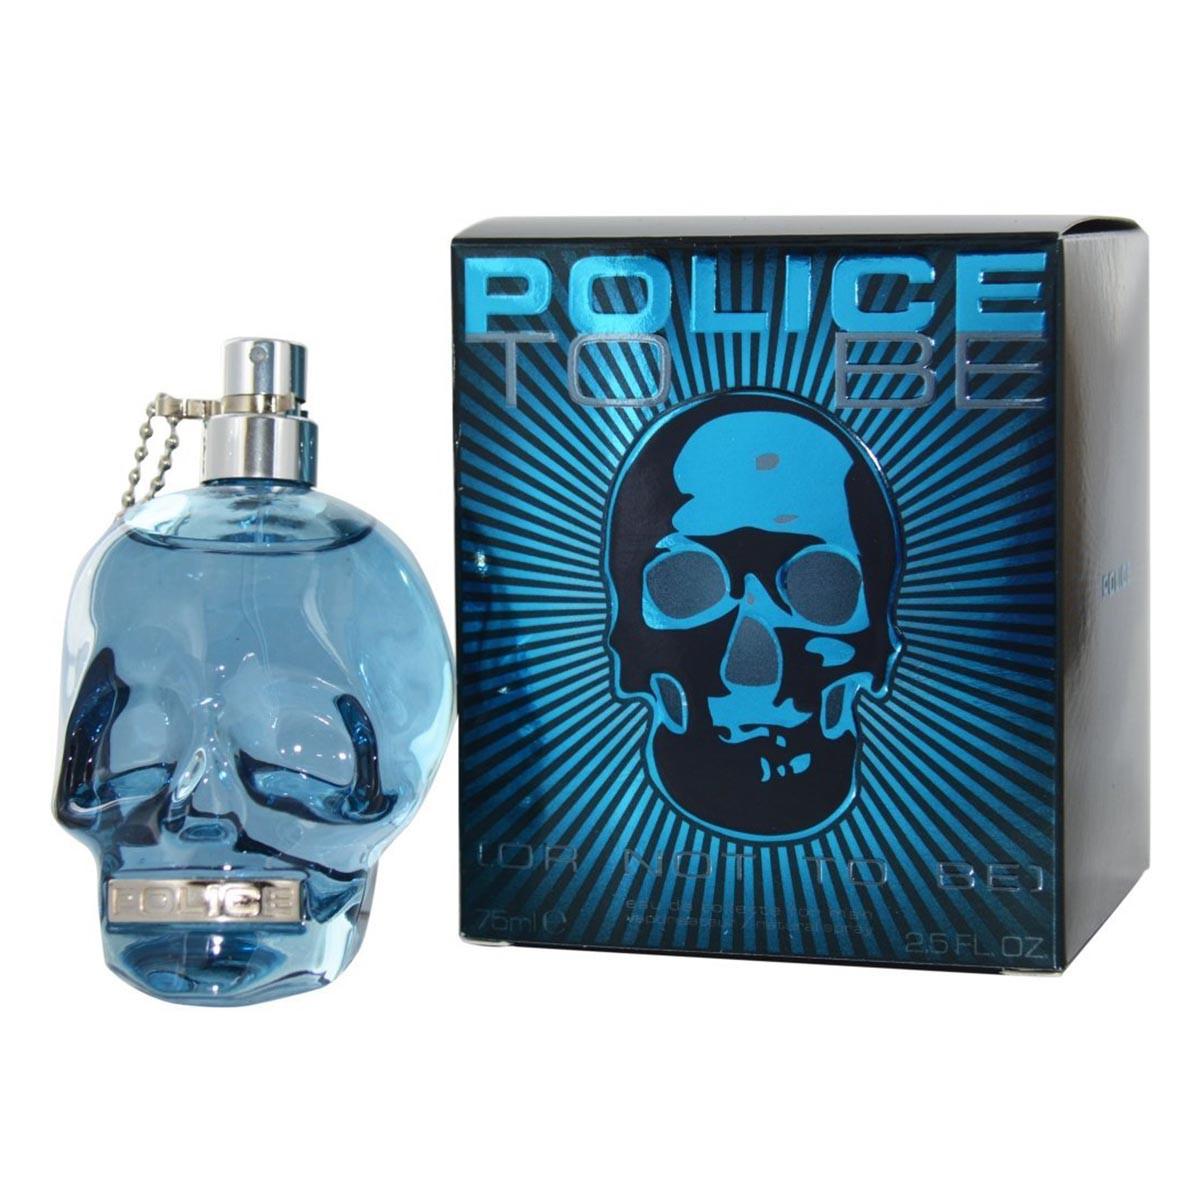 consumo-eau-de-toilette-police-to-be-or-not-to-be-for-man-75ml